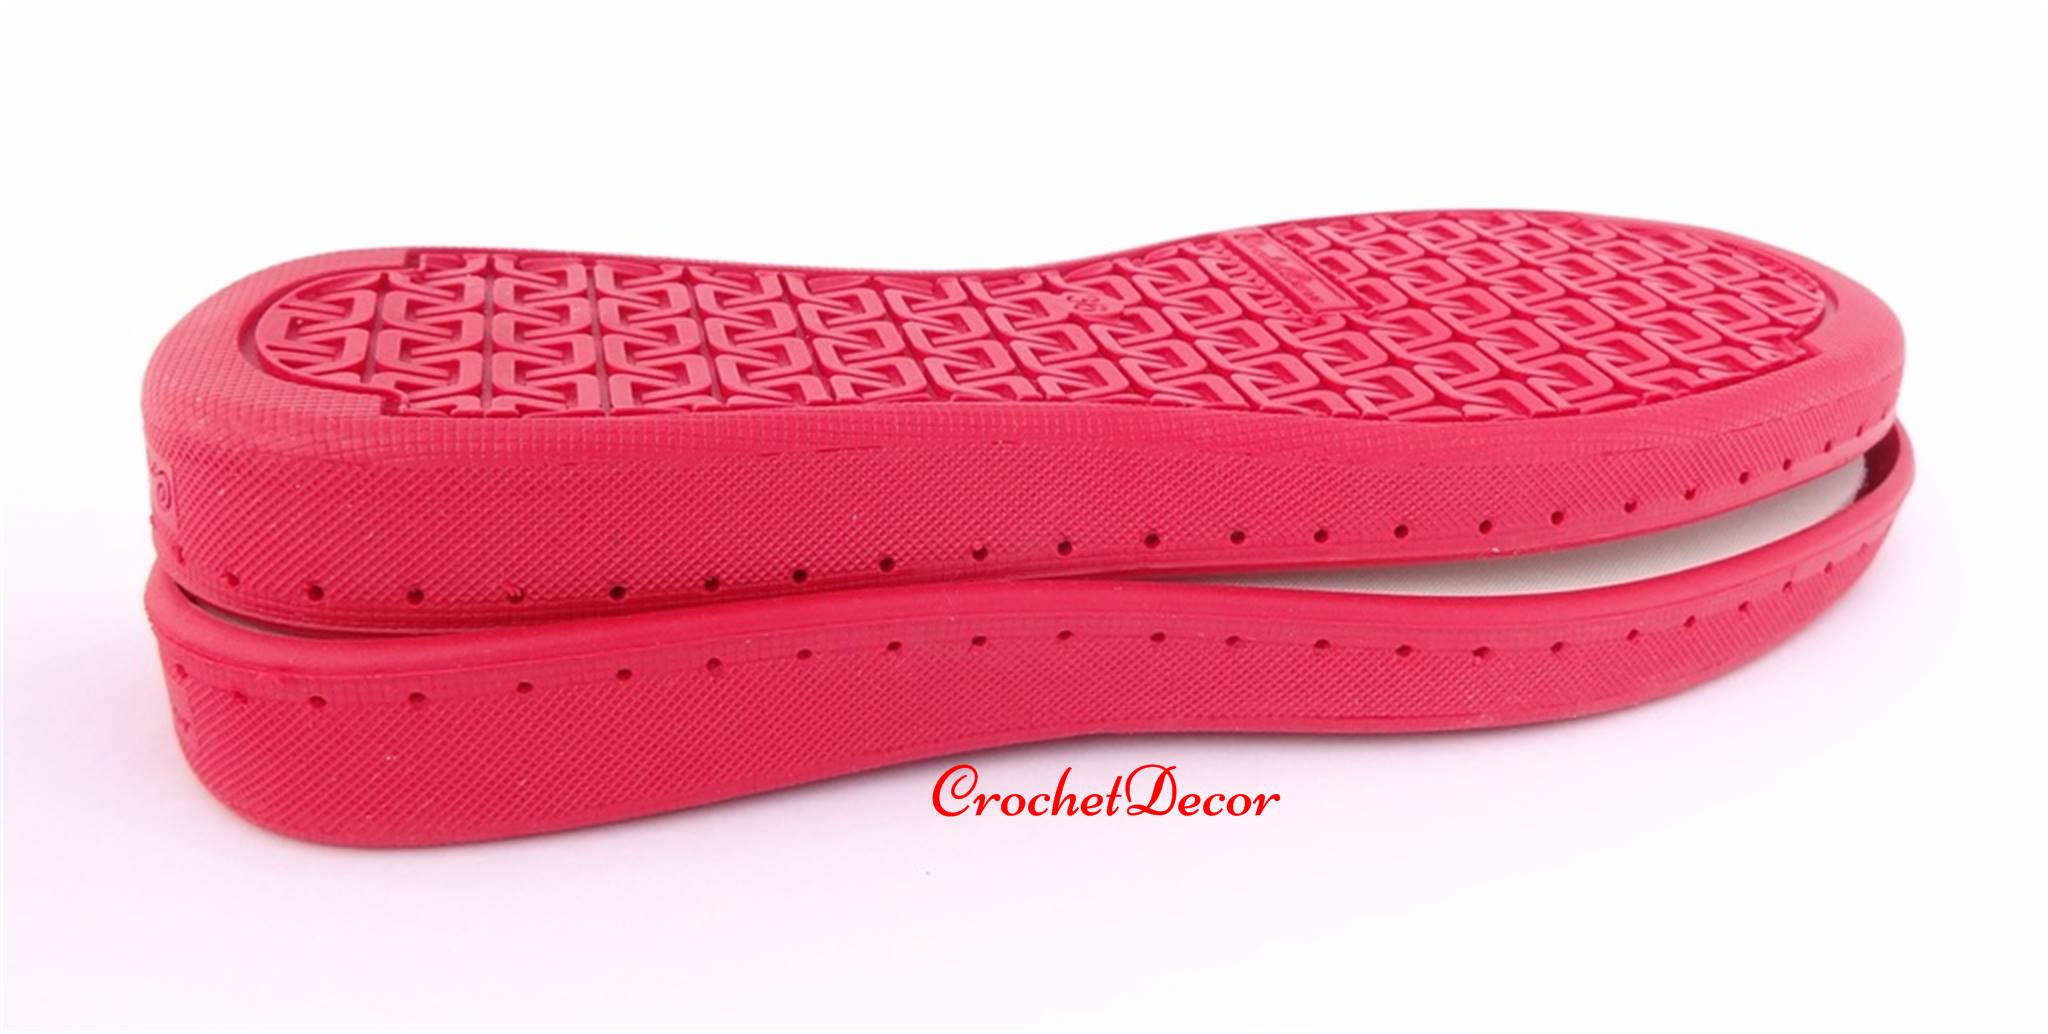 Marina Rubber Sole (Punctured) for Crocheted Shoes - Crochet Decor